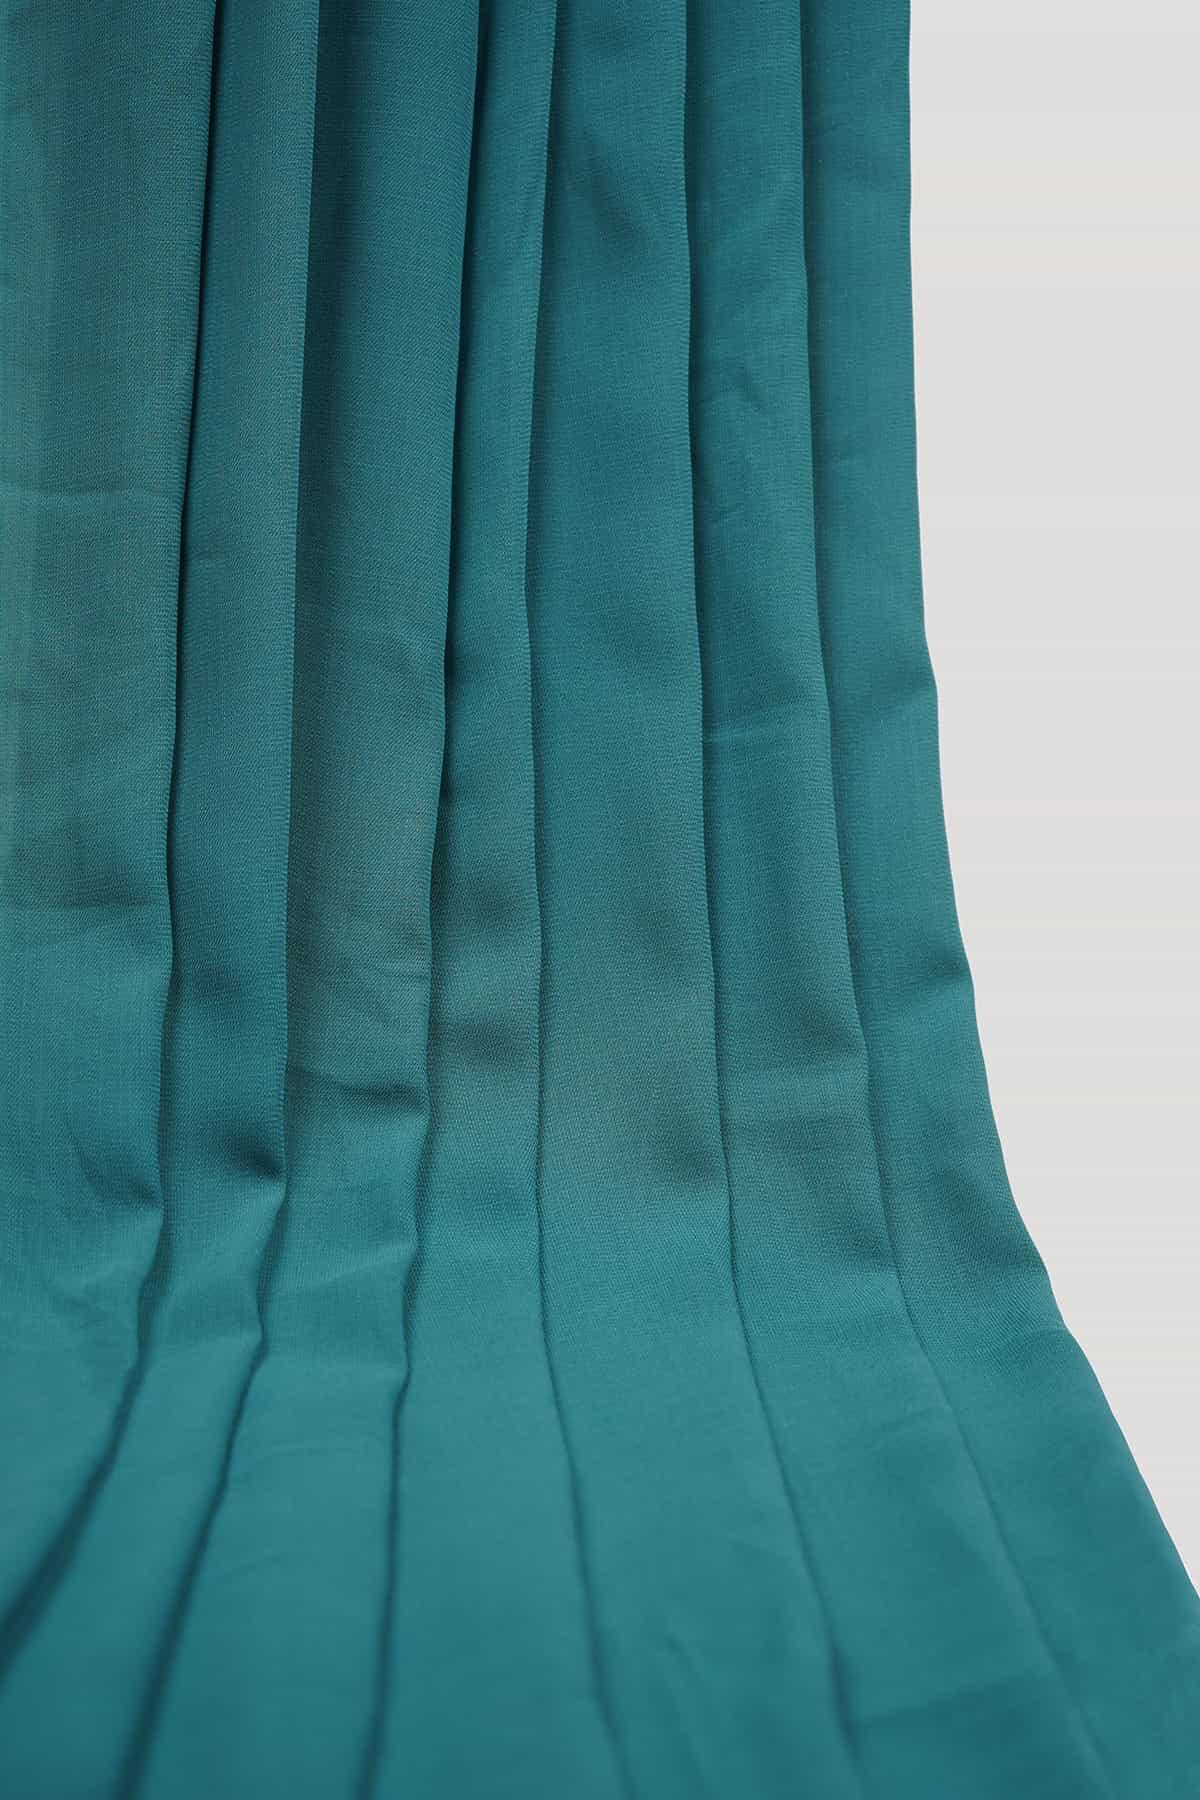 Plain Dyed Misha - saraaha.com - Casual, Casual Wear, Comfy Casual, comfy casuals, Formal Wear, Heavy Weight, Indo Western, Kurta, Long Dresses, Men Wear, Men's wear collection, One Pieces, Plain Dyed, Polyester, Shirt, Silk, Suits, Variety of Color Options, Western, Western Dresses, Women Wear